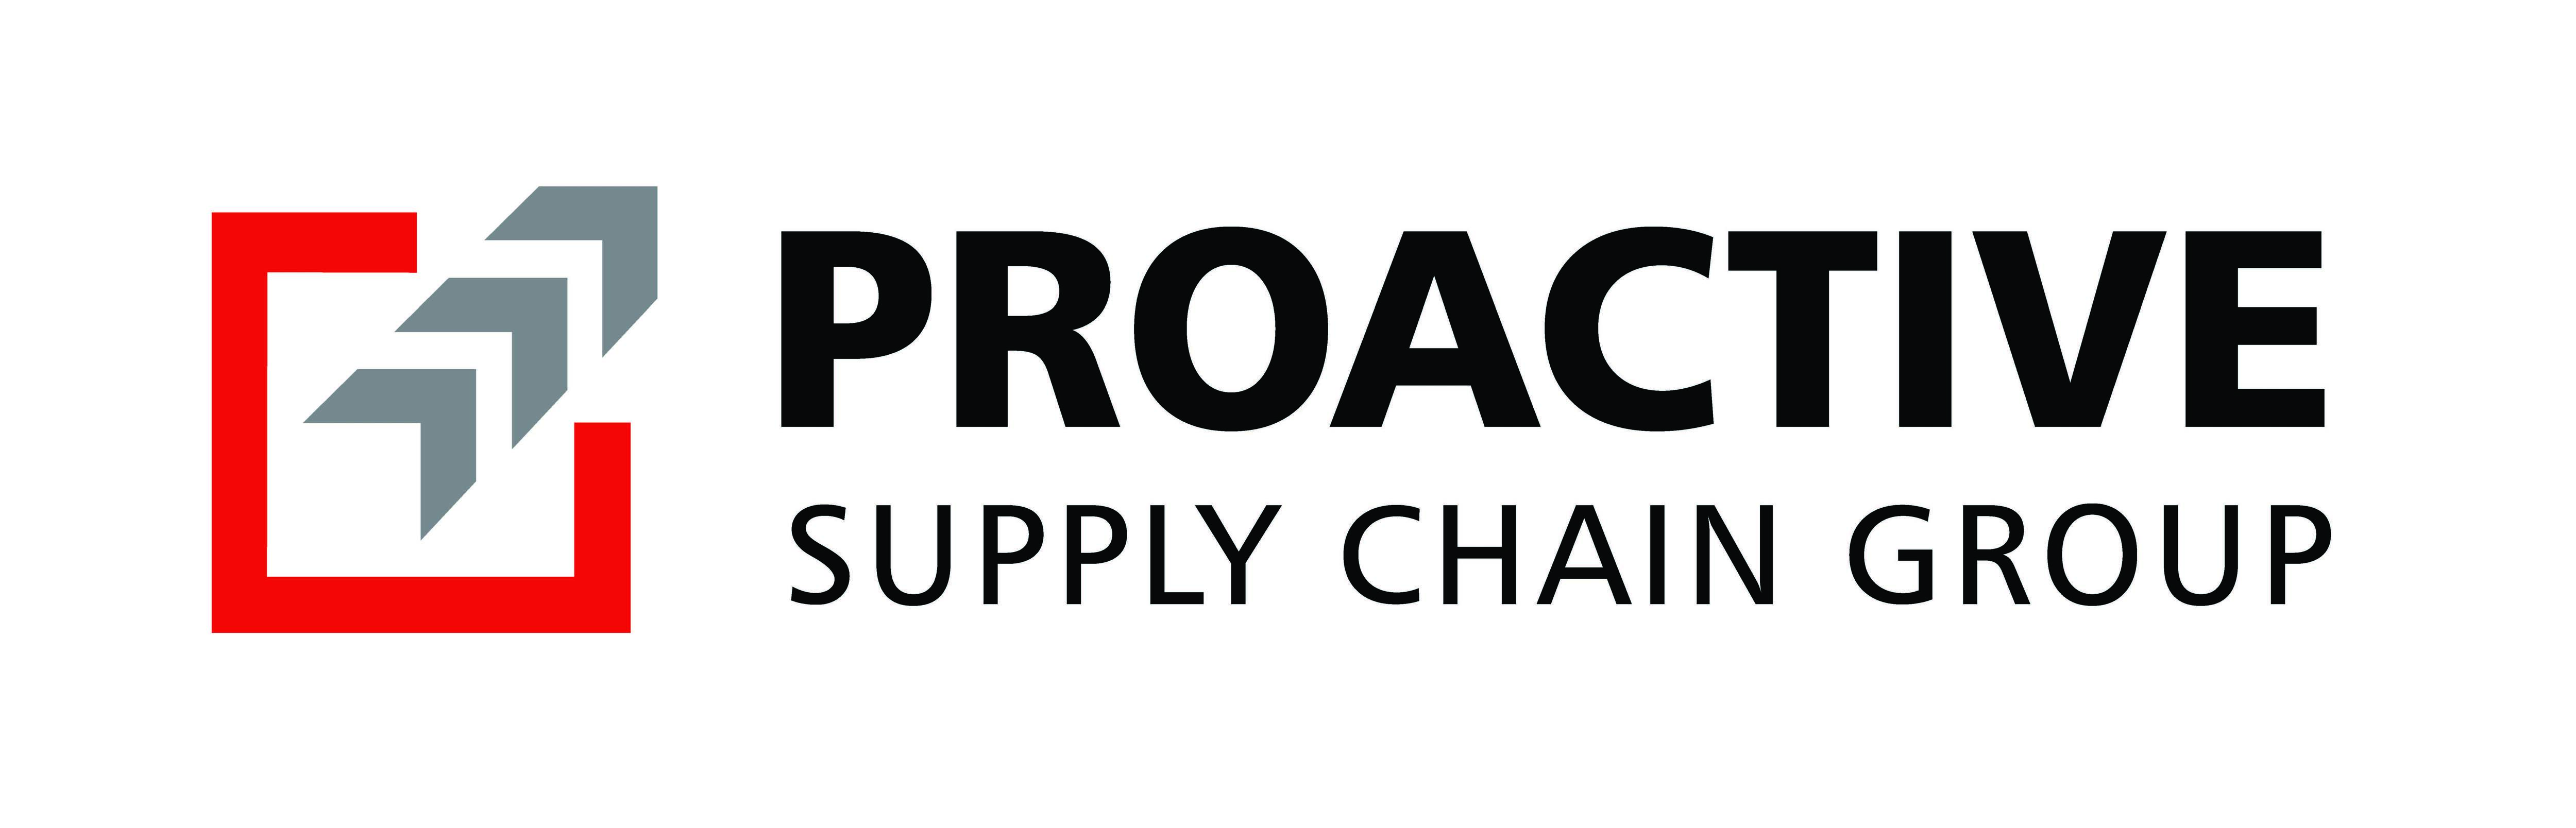 Proactive Supply Chain Group